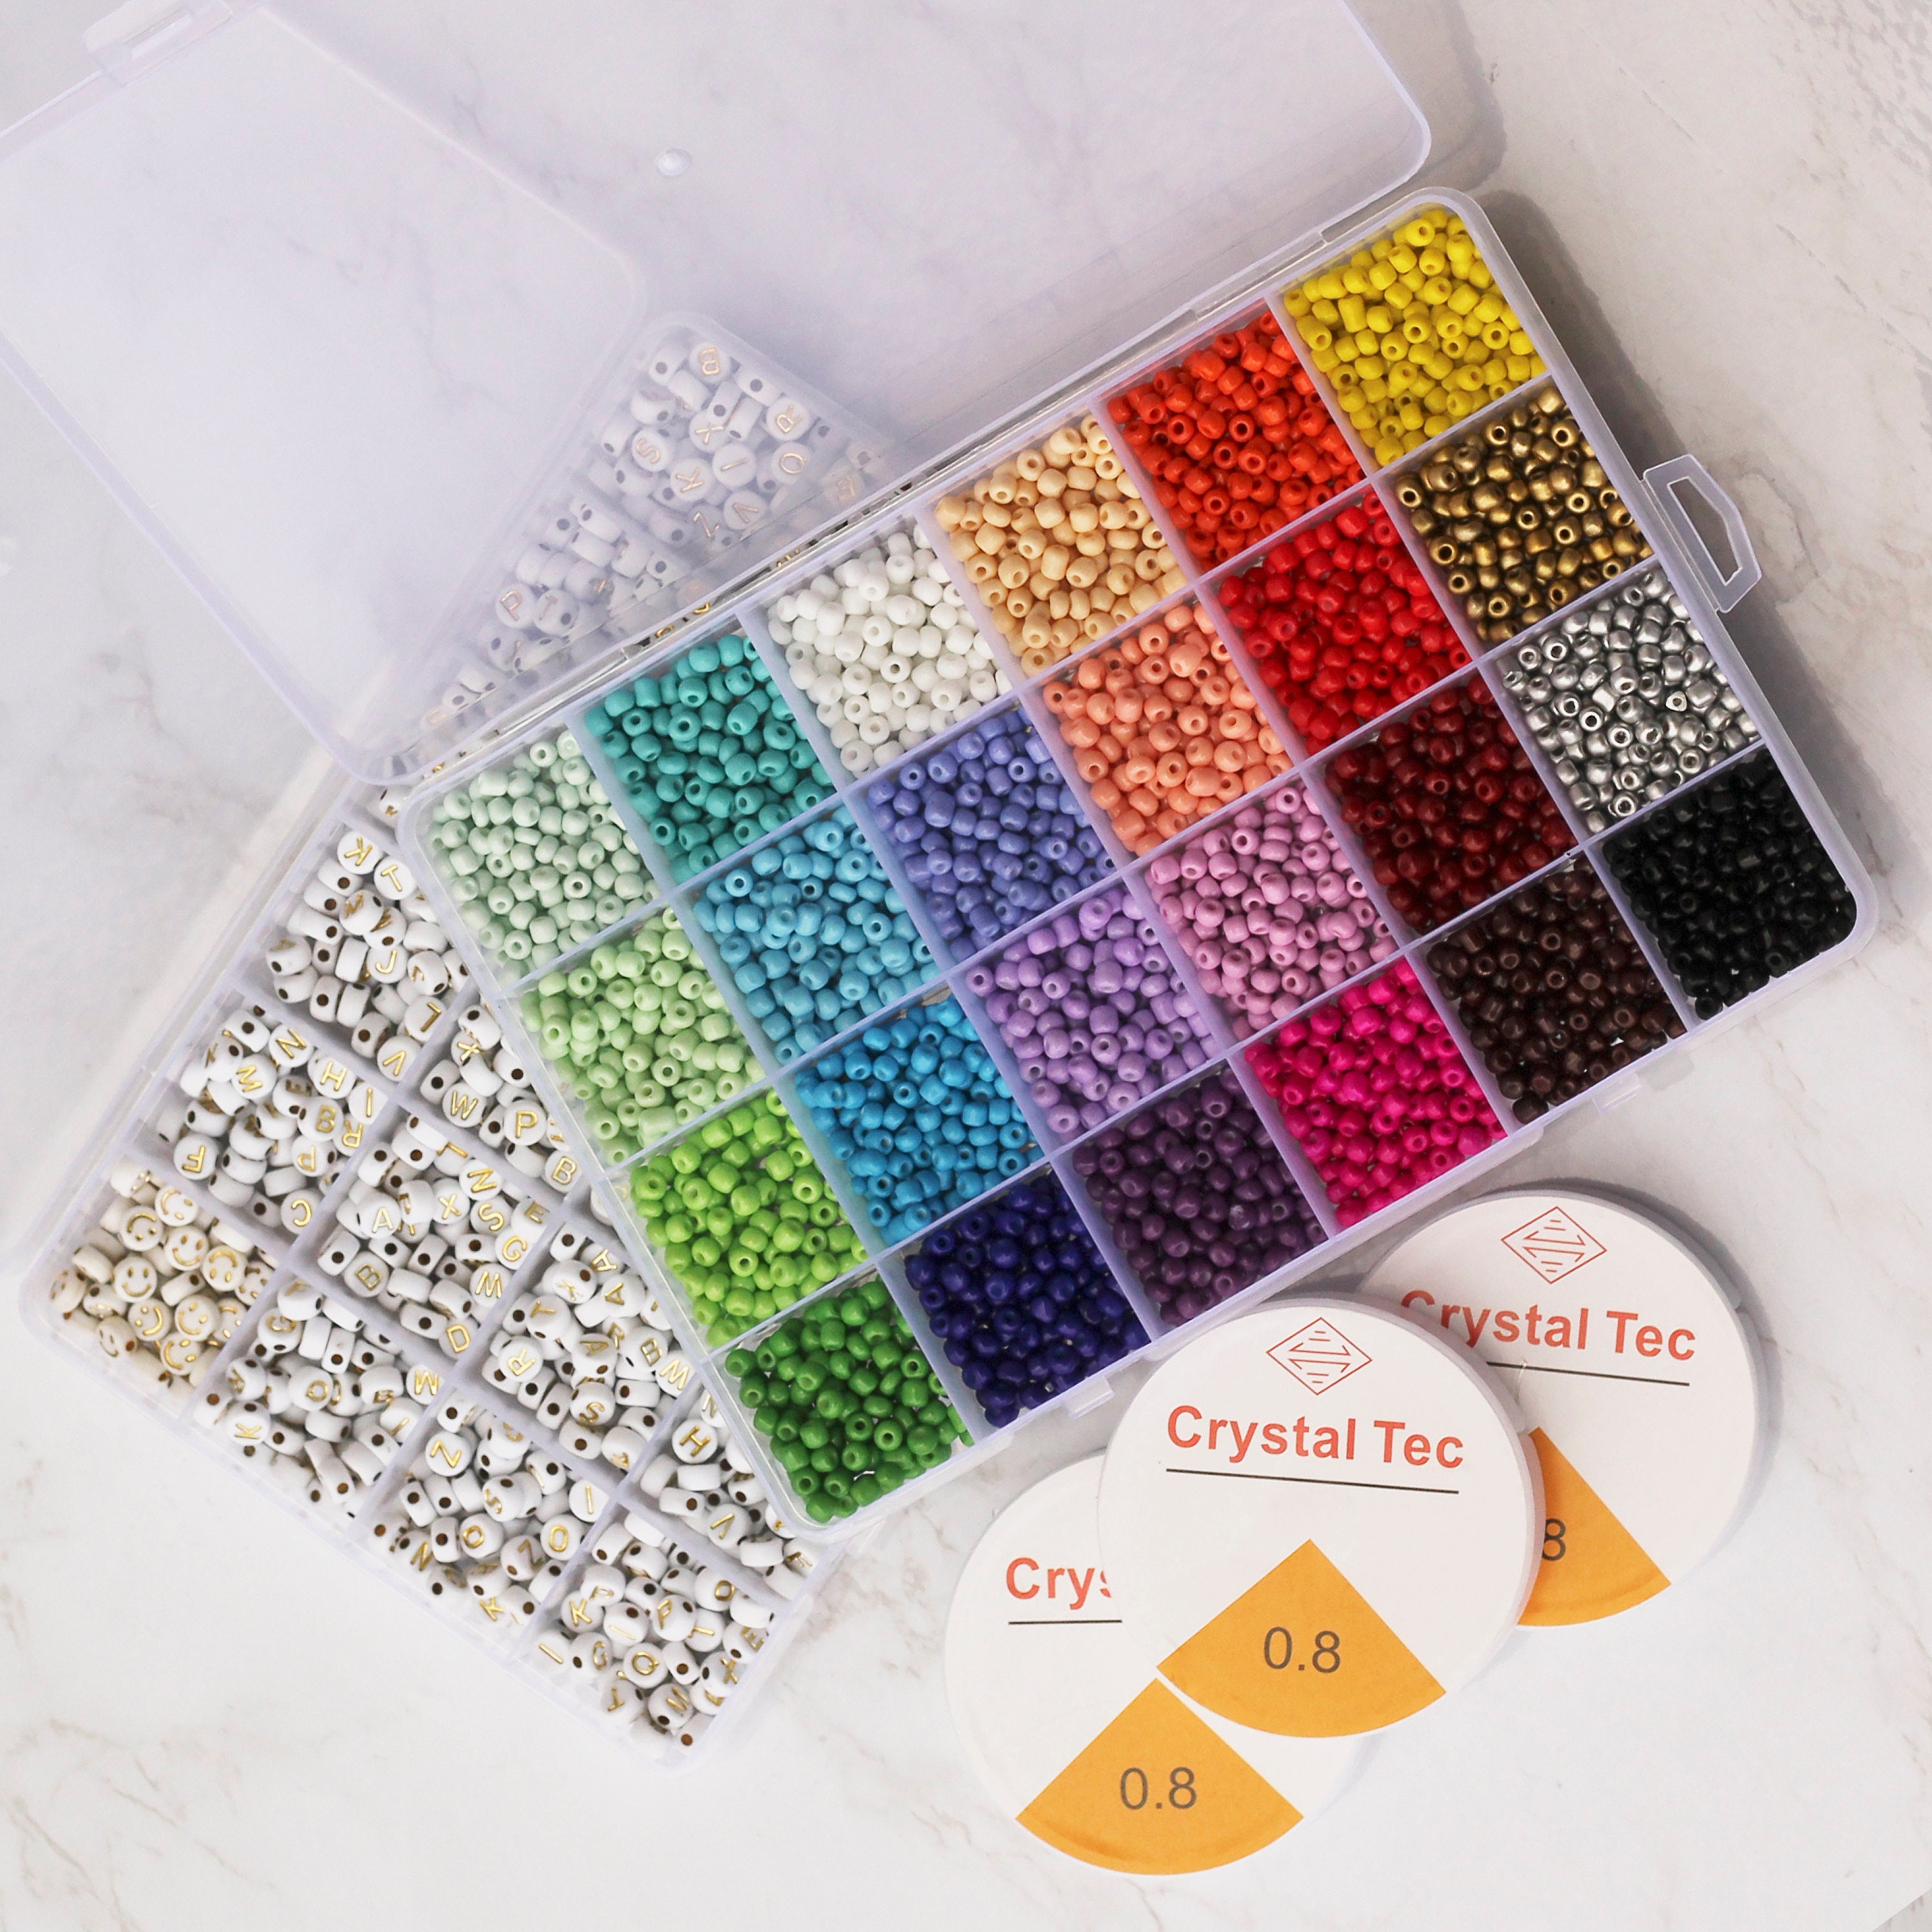 DIY Seed Bead Kit for Kids Arts & Crafts,bracelets,mask Chain,tiny Colorful Waist  Bead Box Kit,beads for Mask Chains,jewelry Making for Kids 